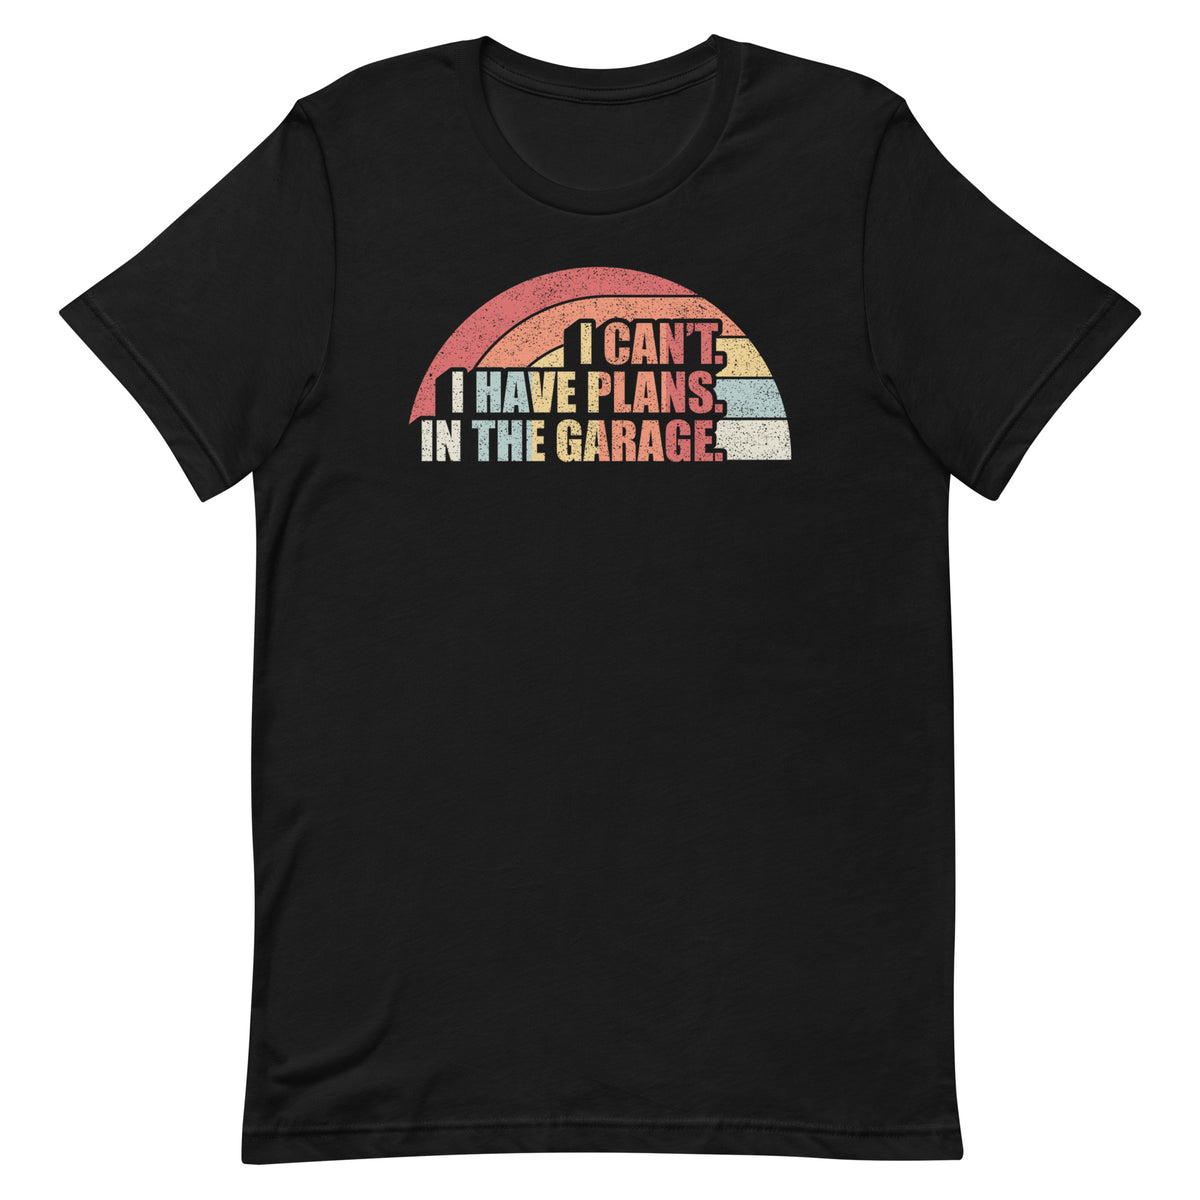 I Cant I Have Plans In The Garage Unisex t-shirt